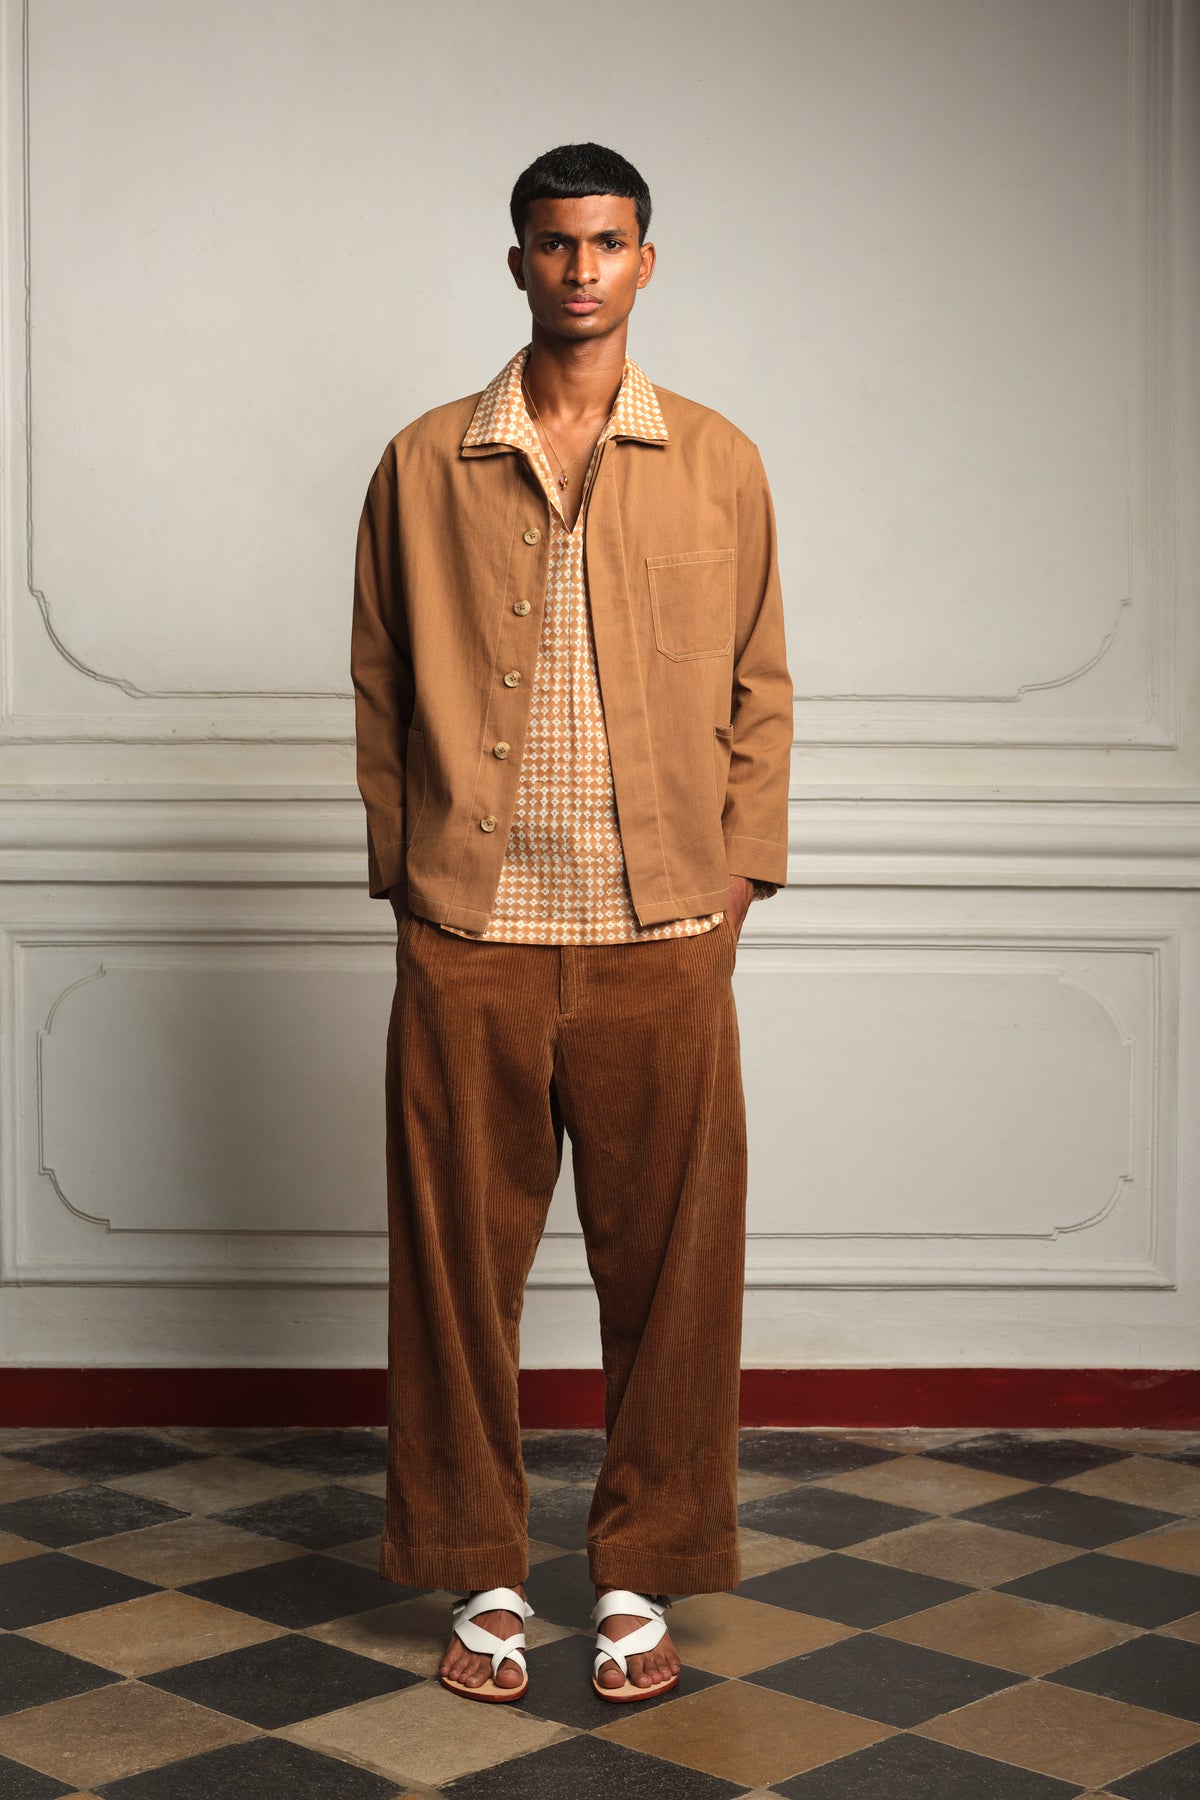 Flat front trousers